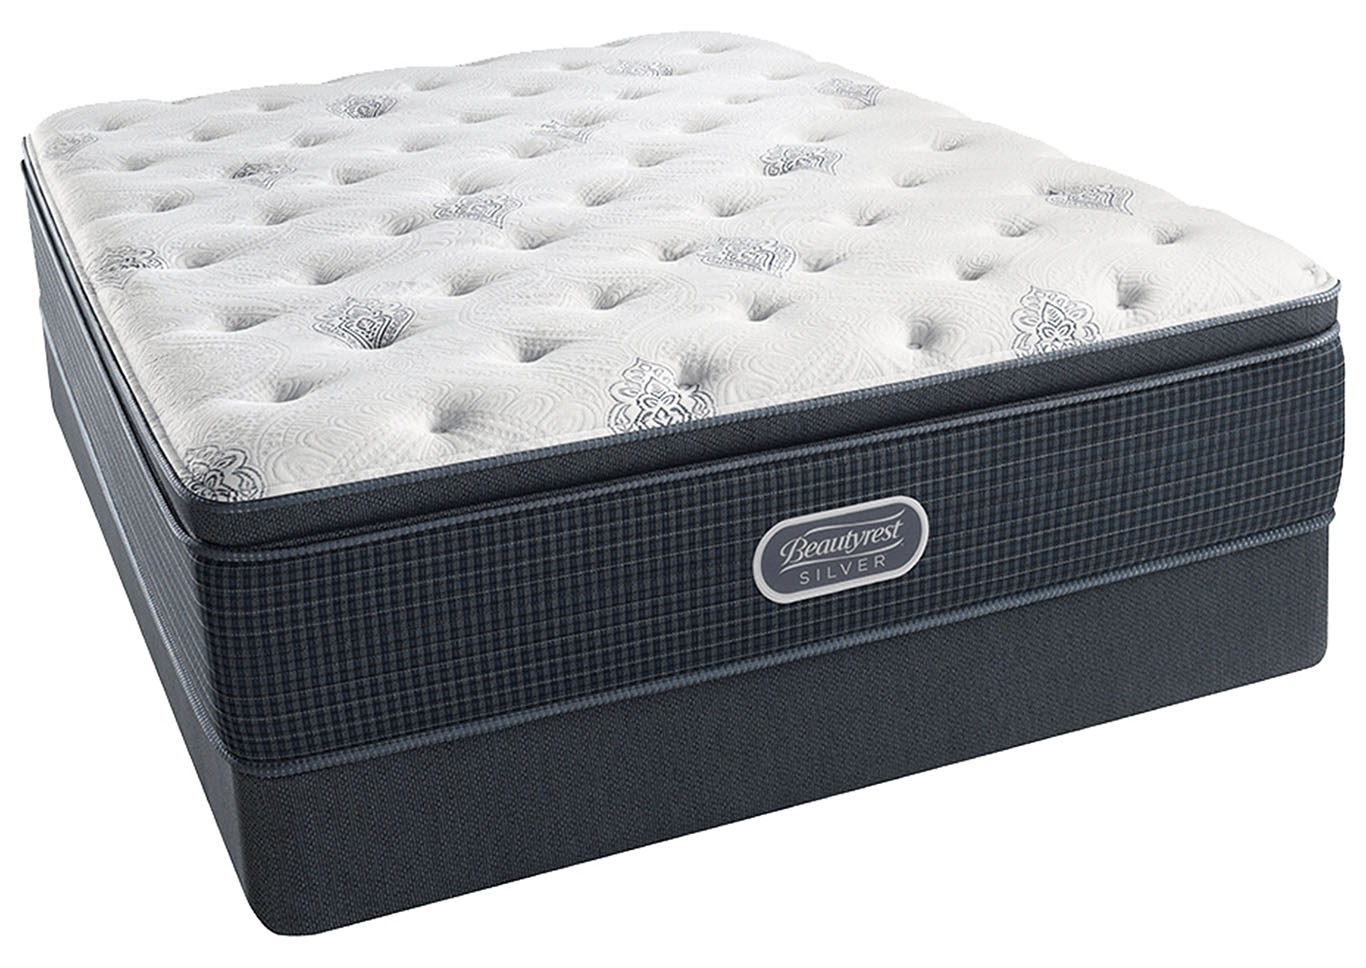 Summer Sizzle Luxury Firm Pillow Top Full Mattress,Instore